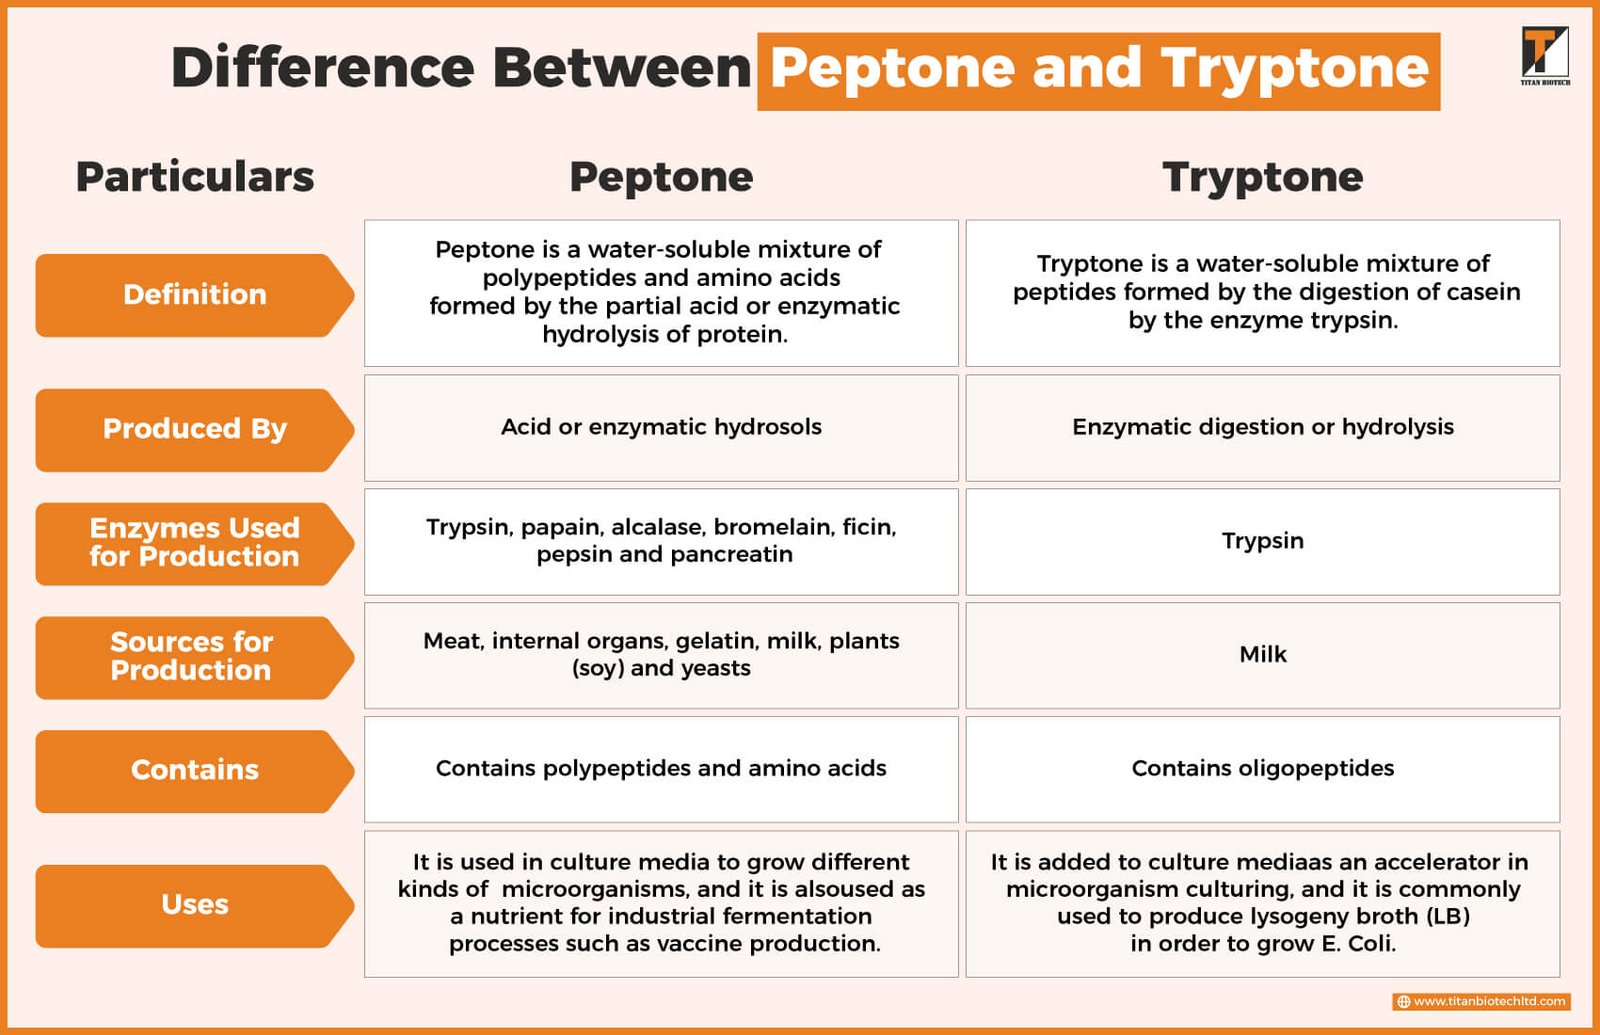 Difference Between Peptone and Tryptone